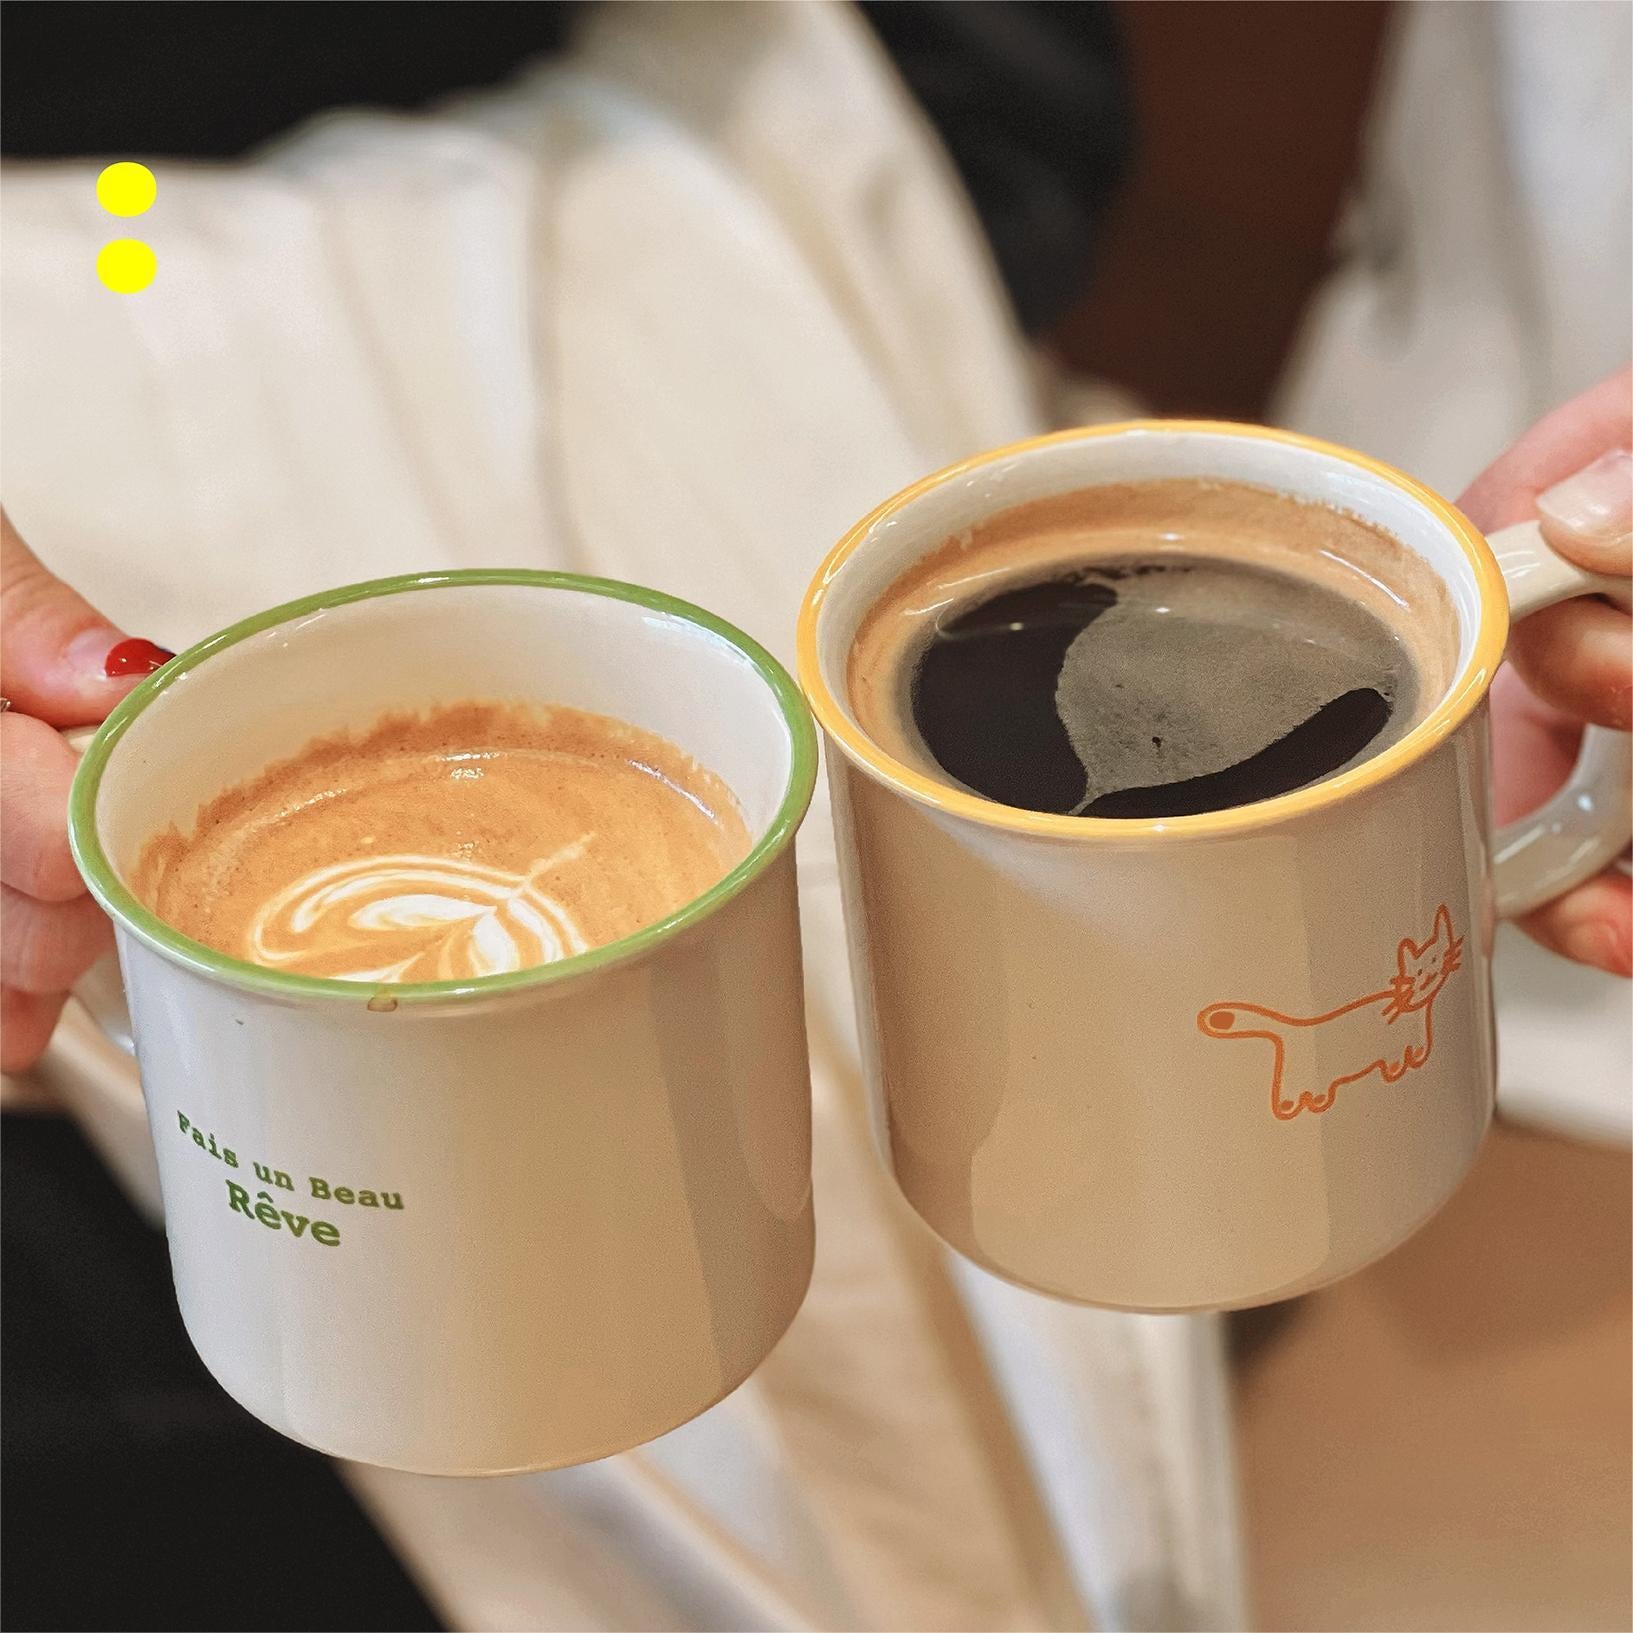 Friends holding the Fais un Beau Rêve Coffee Mugs Cheers. One hold the Matcha Colors and Another holds the Orange. Latte and Americano in Mugs.